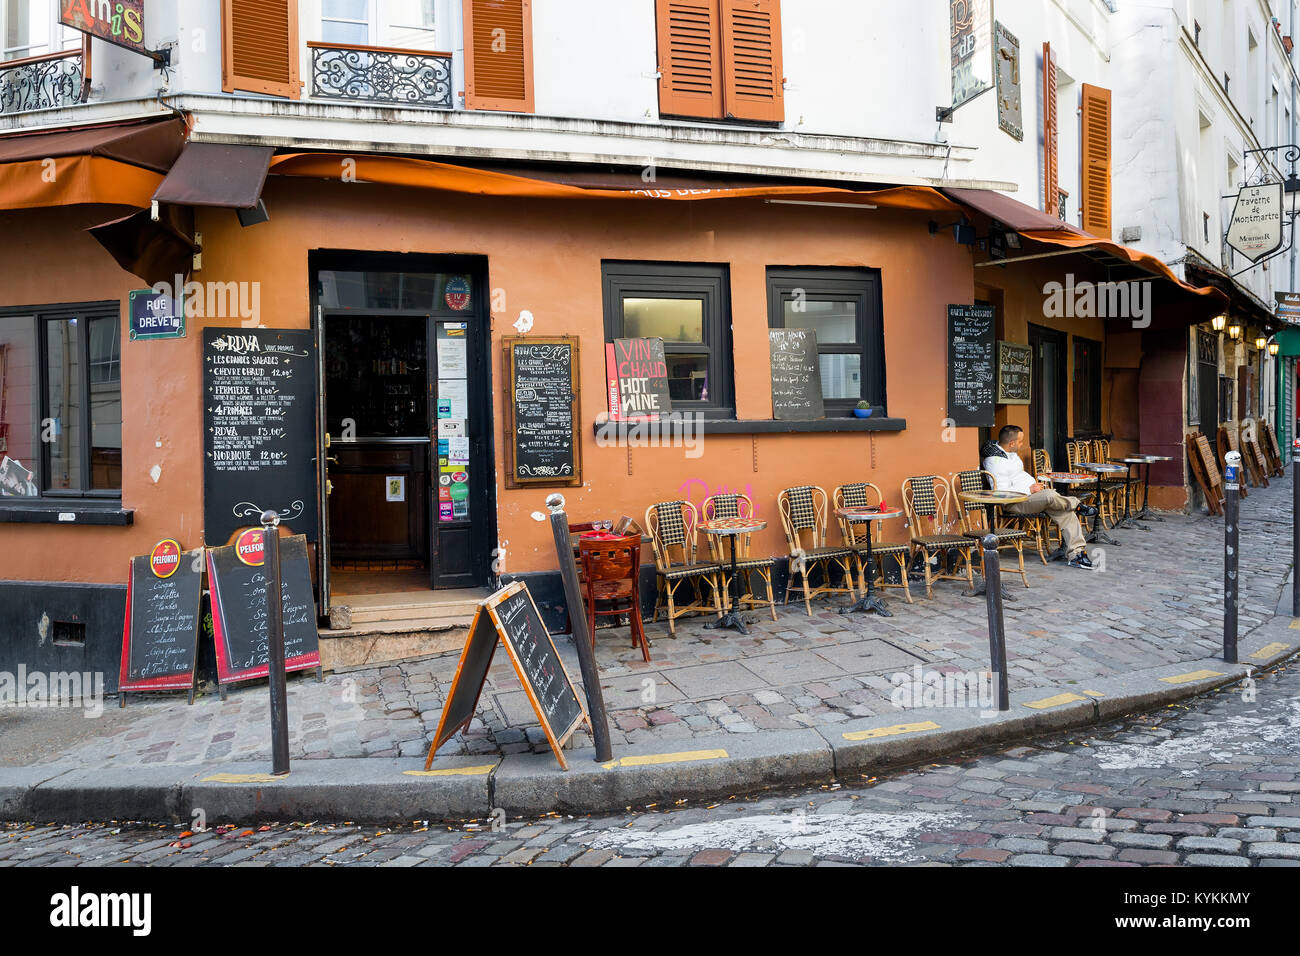 PARIS - Jan 2, 2014: Cafe in the Montmartre neighborhood. Typical place with sidewalk tables and handwritten menus. Stock Photo